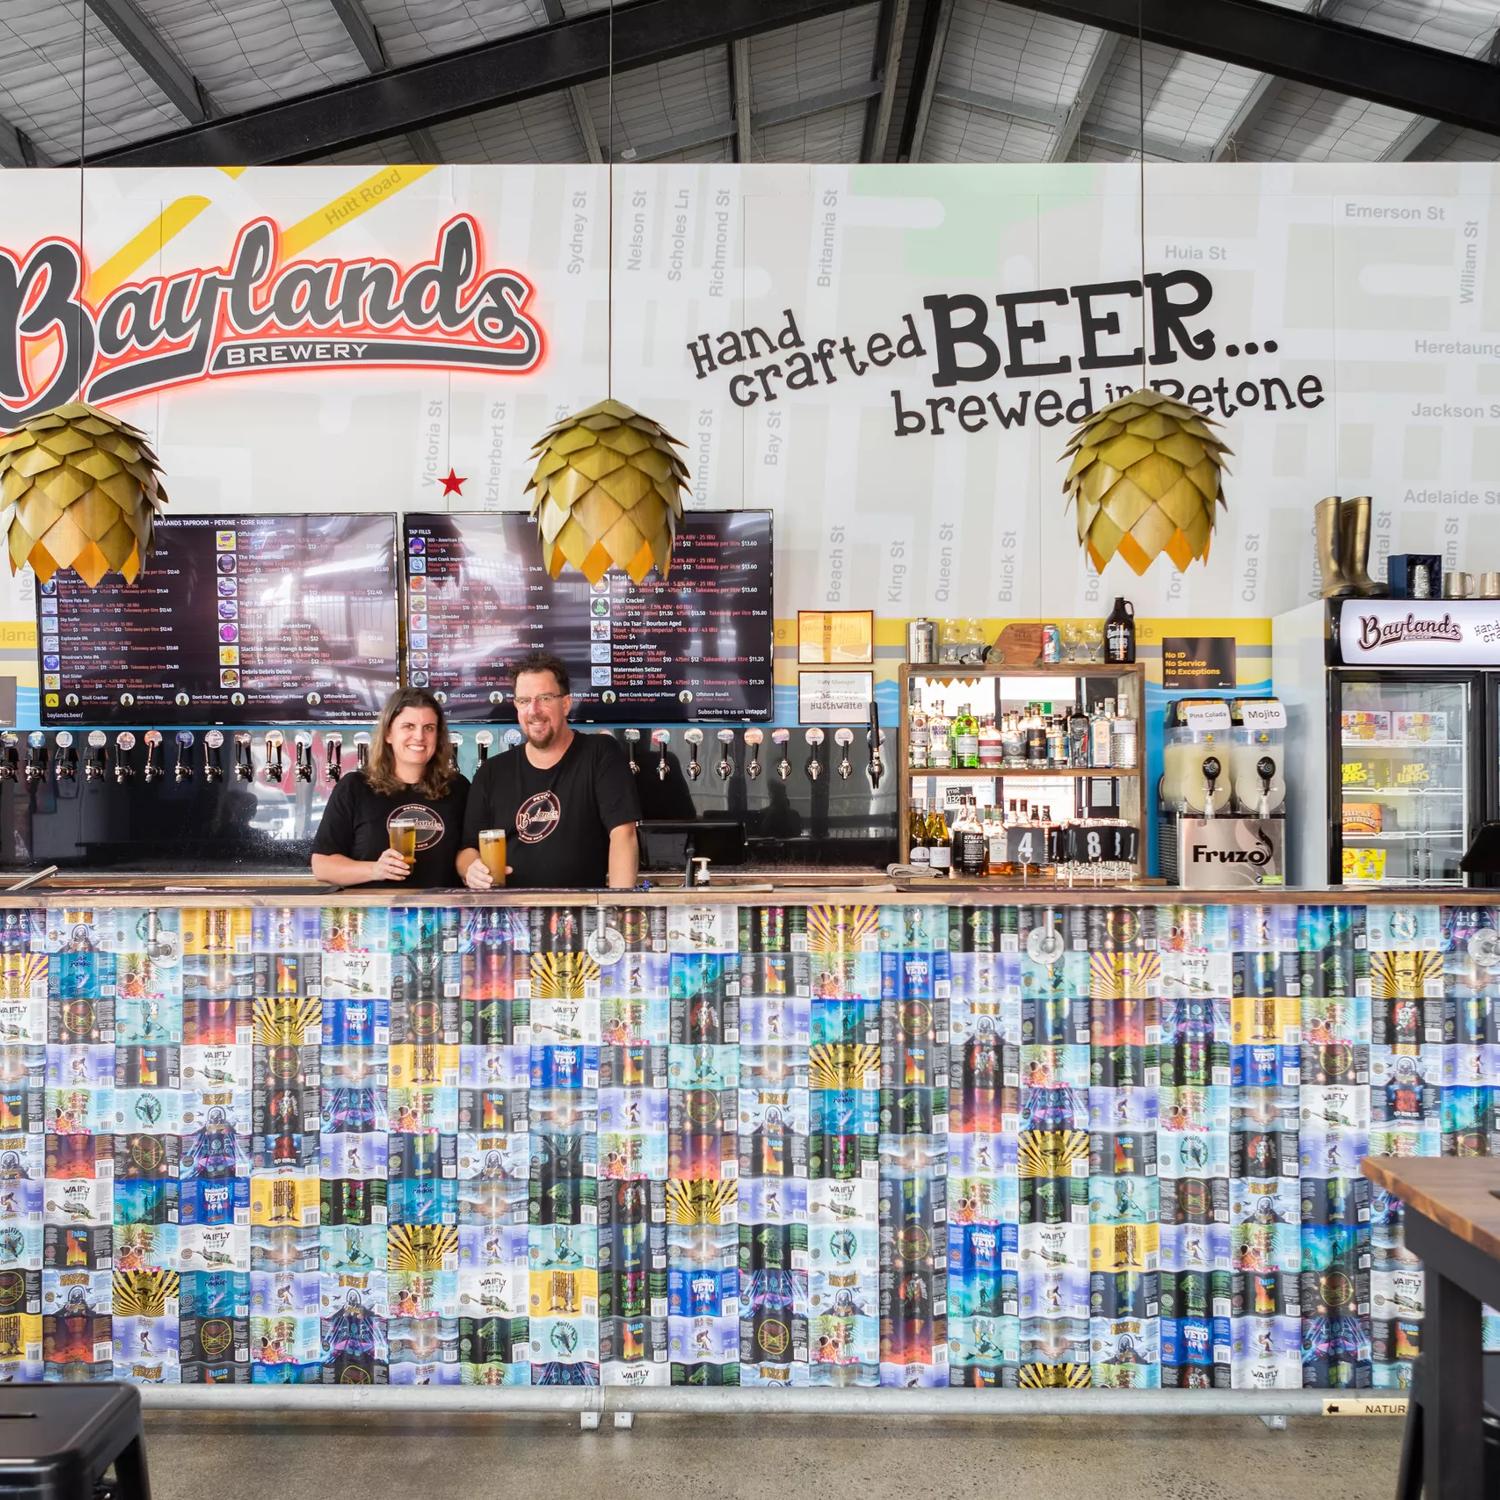 A wide look at the main bar at Baylands Brewery, with two bartenders posing in front of the beer taps, with a beer in hand.